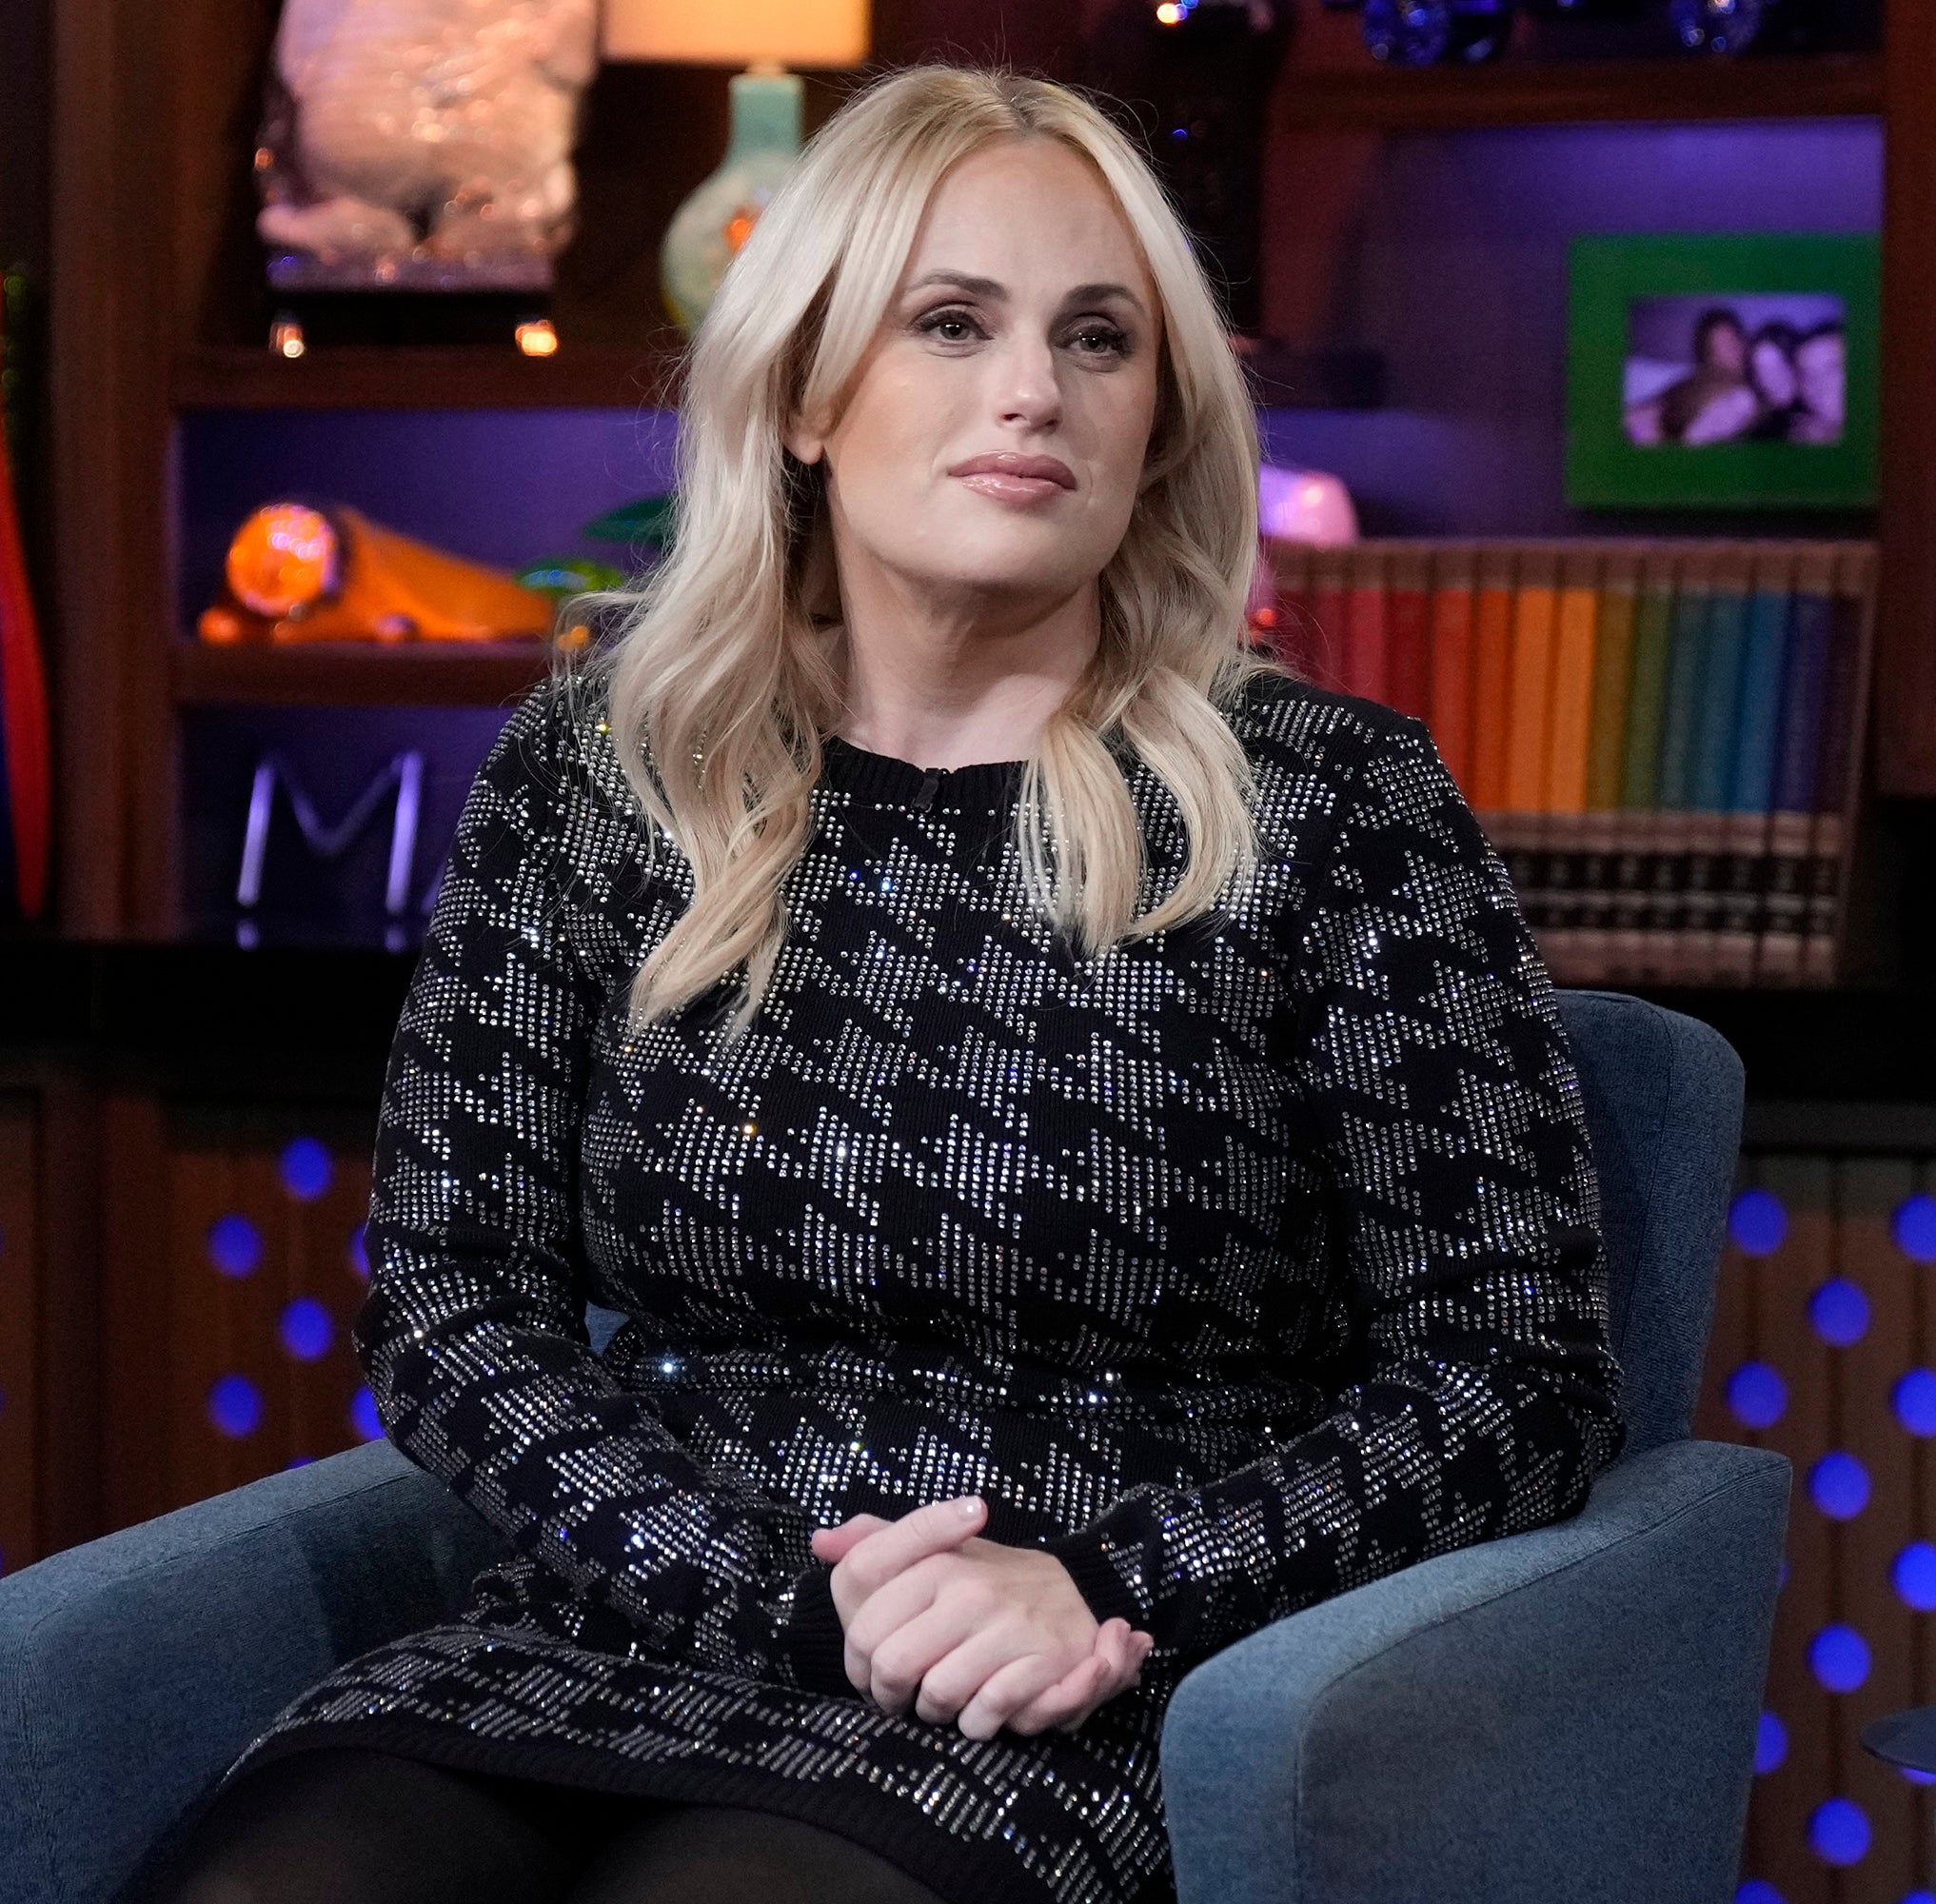 Rebel in a patterned dress sitting on a talk show set